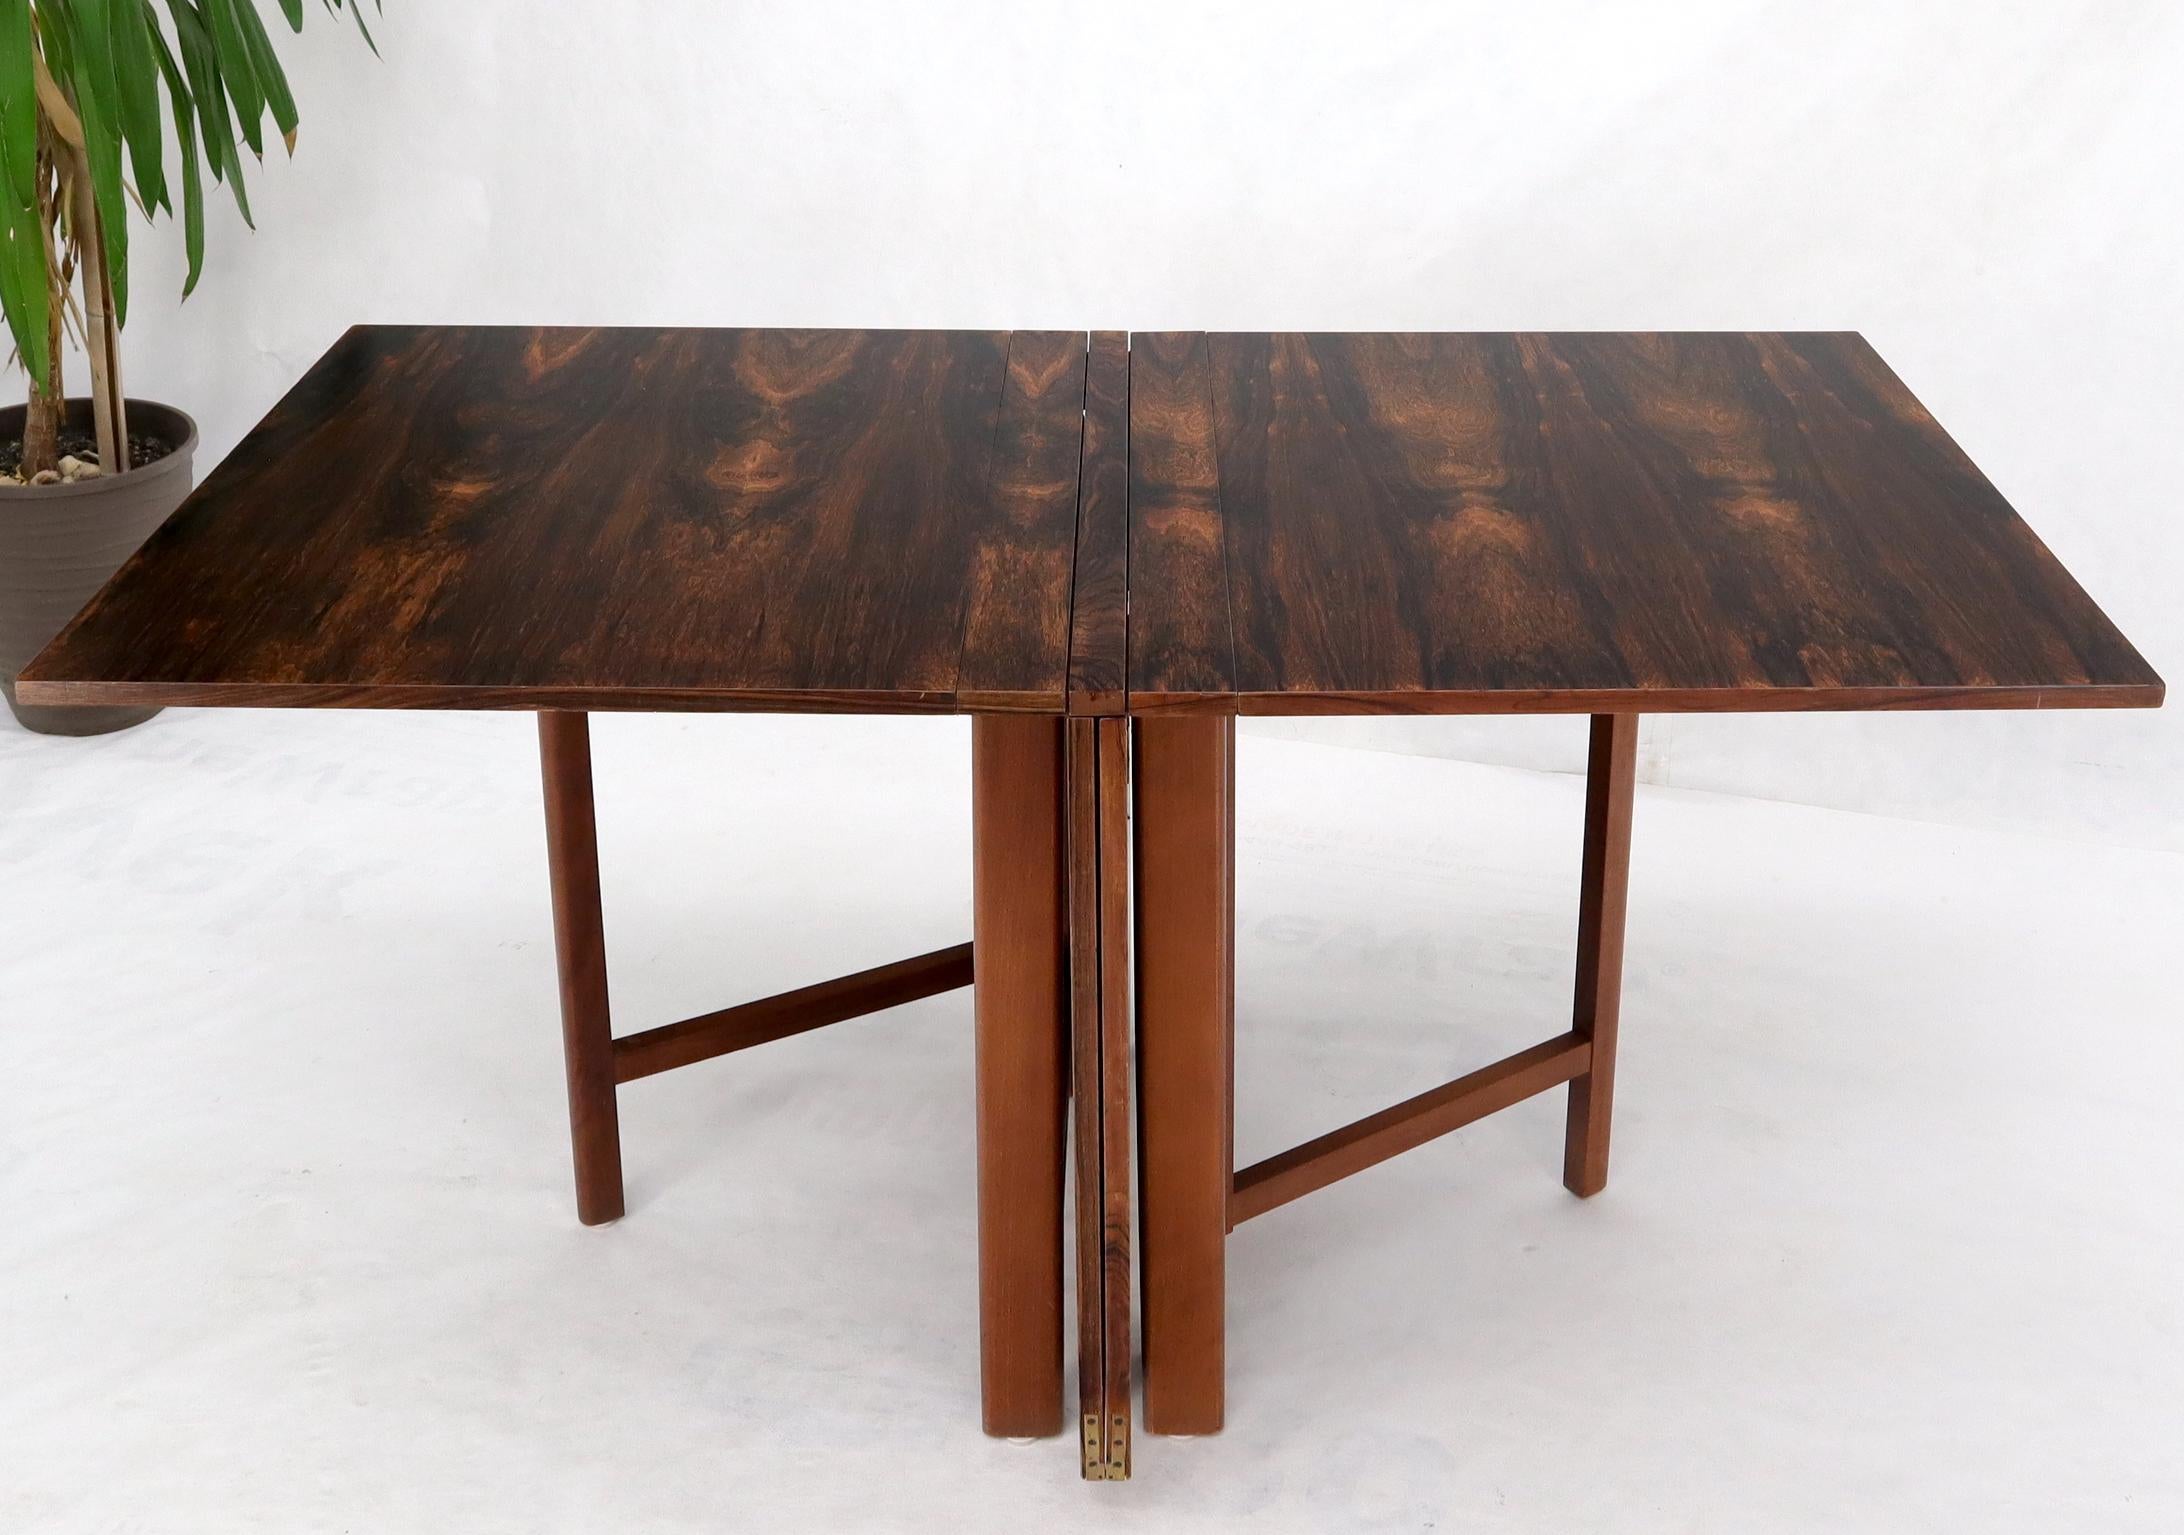 Danish Mid-Century Modern Rosewood Gate Leg Maria Dining Table Bruno Mathsson  In Excellent Condition For Sale In Rockaway, NJ